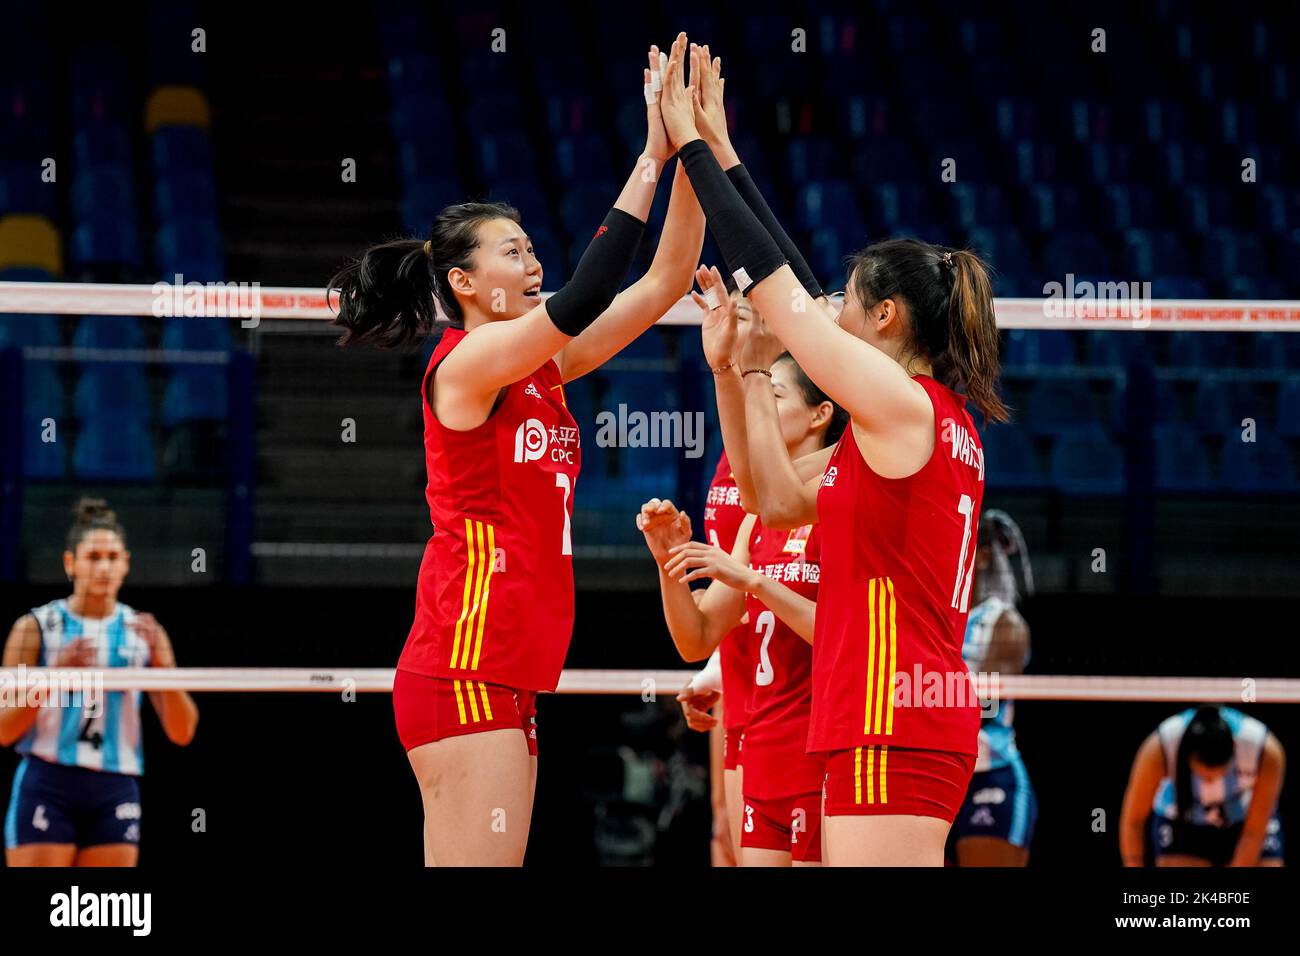 ARNHEM, NETHERLANDS - SEPTEMBER 25: Yizhu Wang of China during the Pool D Phase 1 match between China and Argentina on Day 3 of the FIVB Volleyball Womens World Championship 2022 at the Gelredome on September 25, 2022 in Arnhem, Netherlands (Photo by Rene Nijhuis/Orange Pictures) Stock Photo